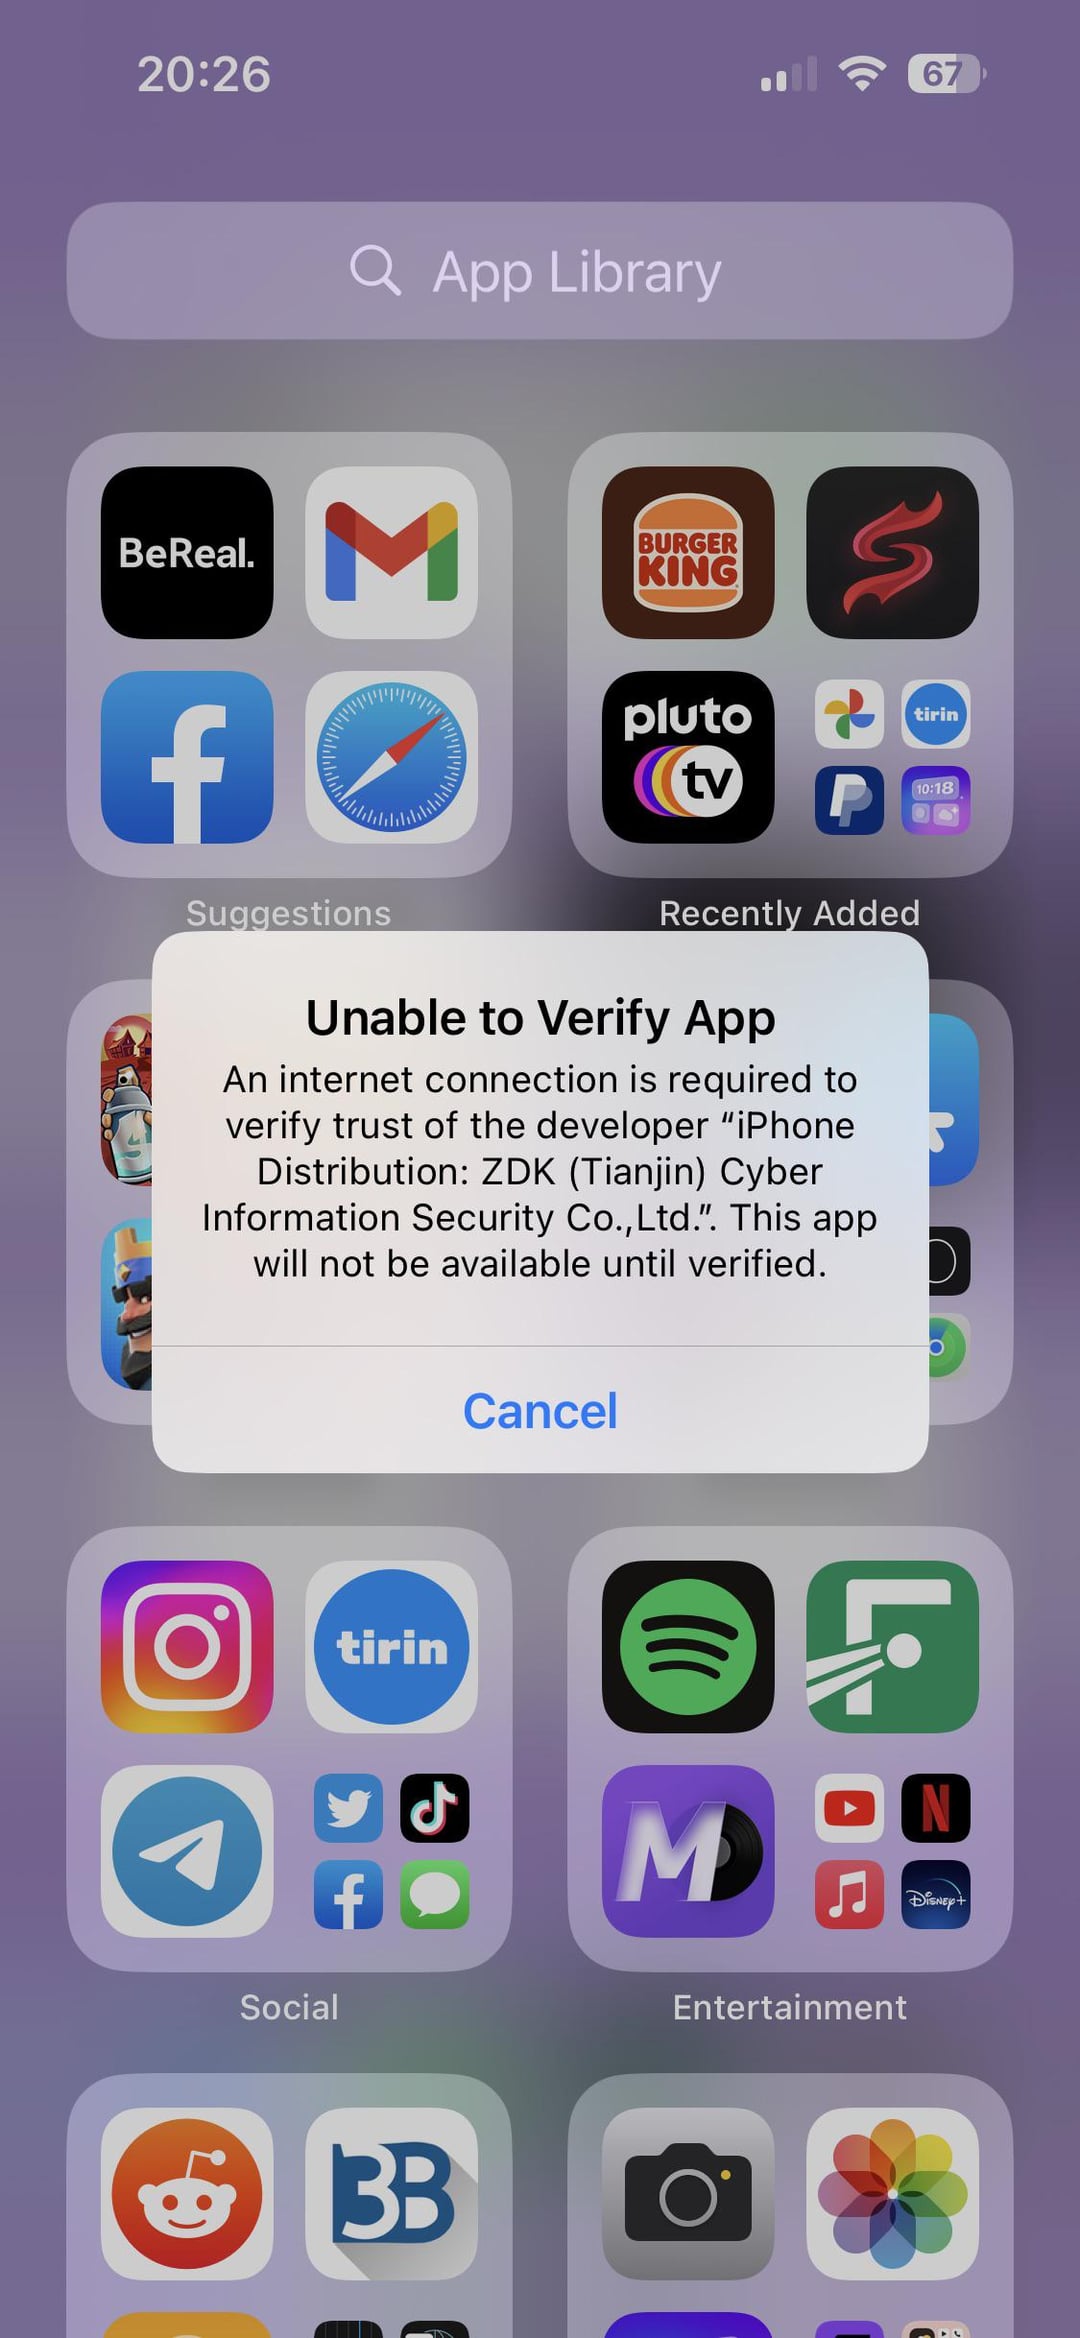 unable to install scarlet ios